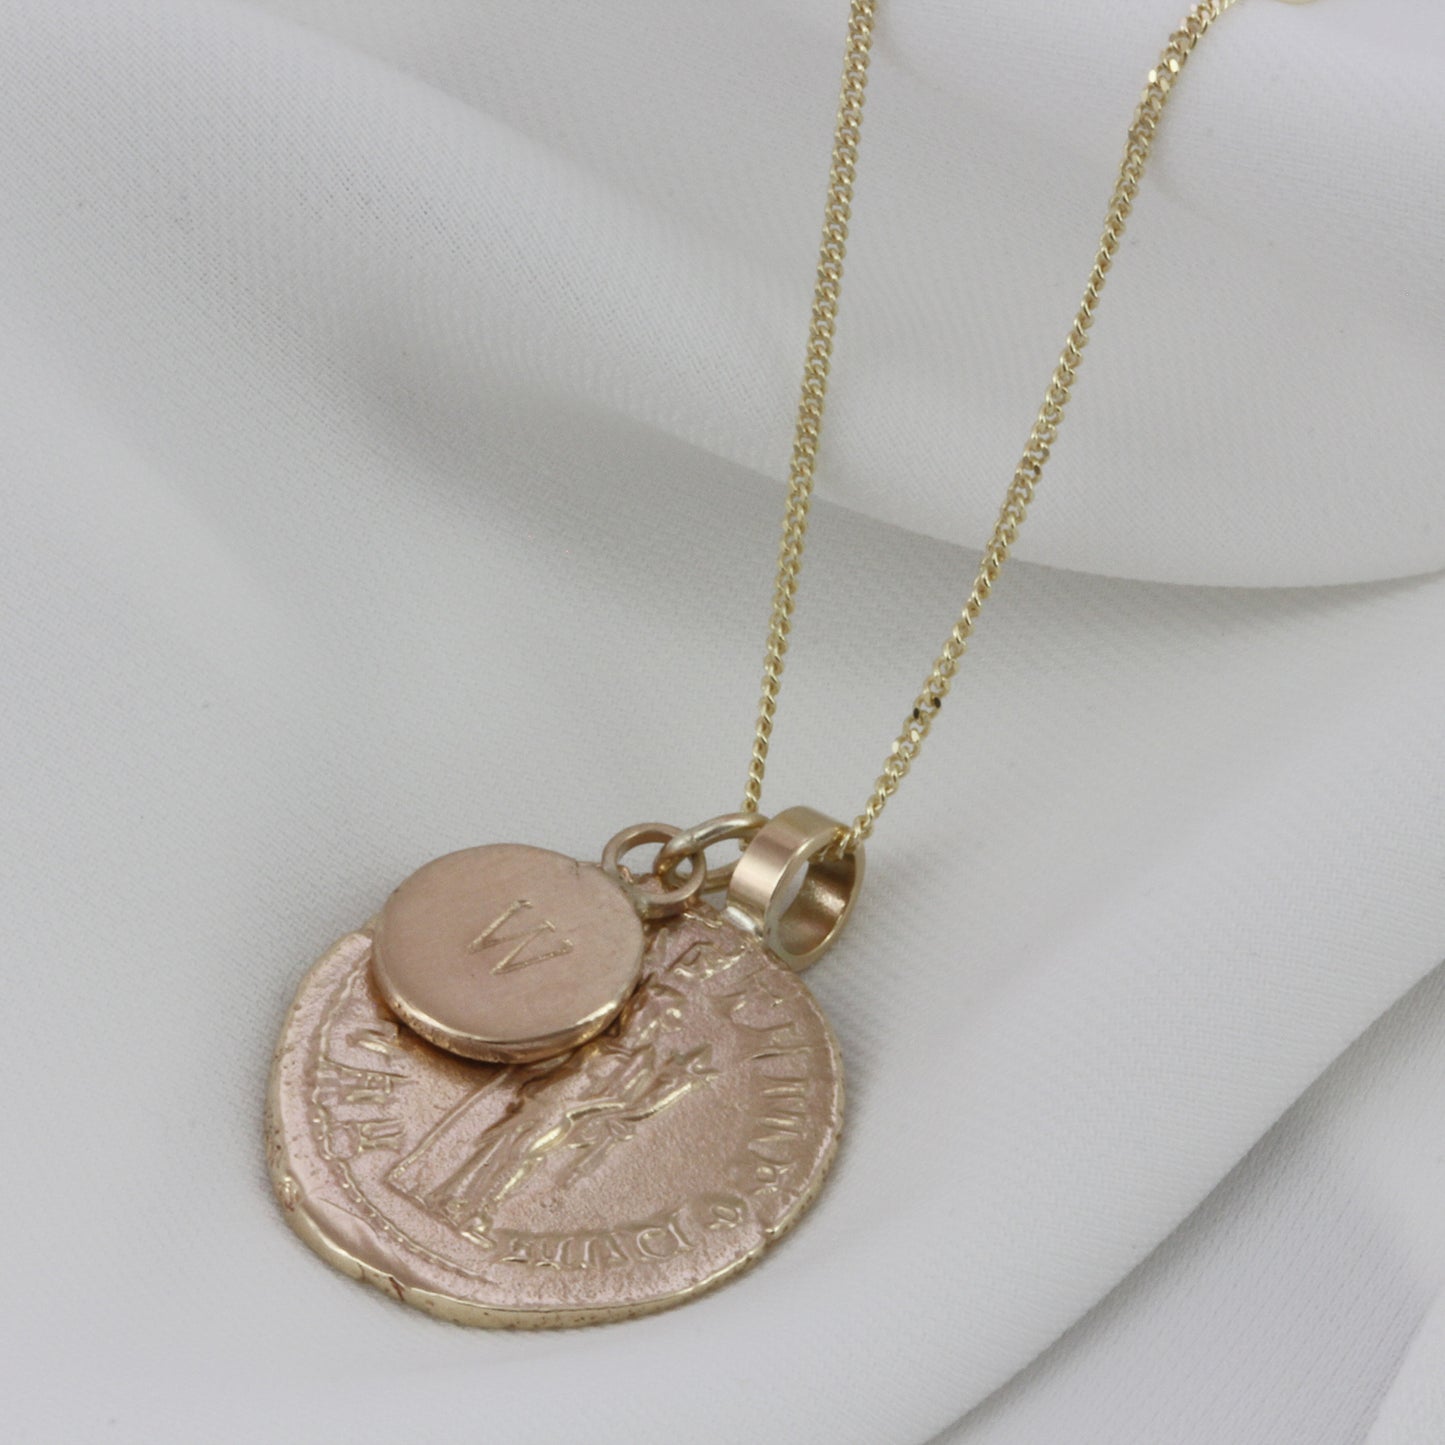 Personalised Goddess Necklace 9ct Solid Gold